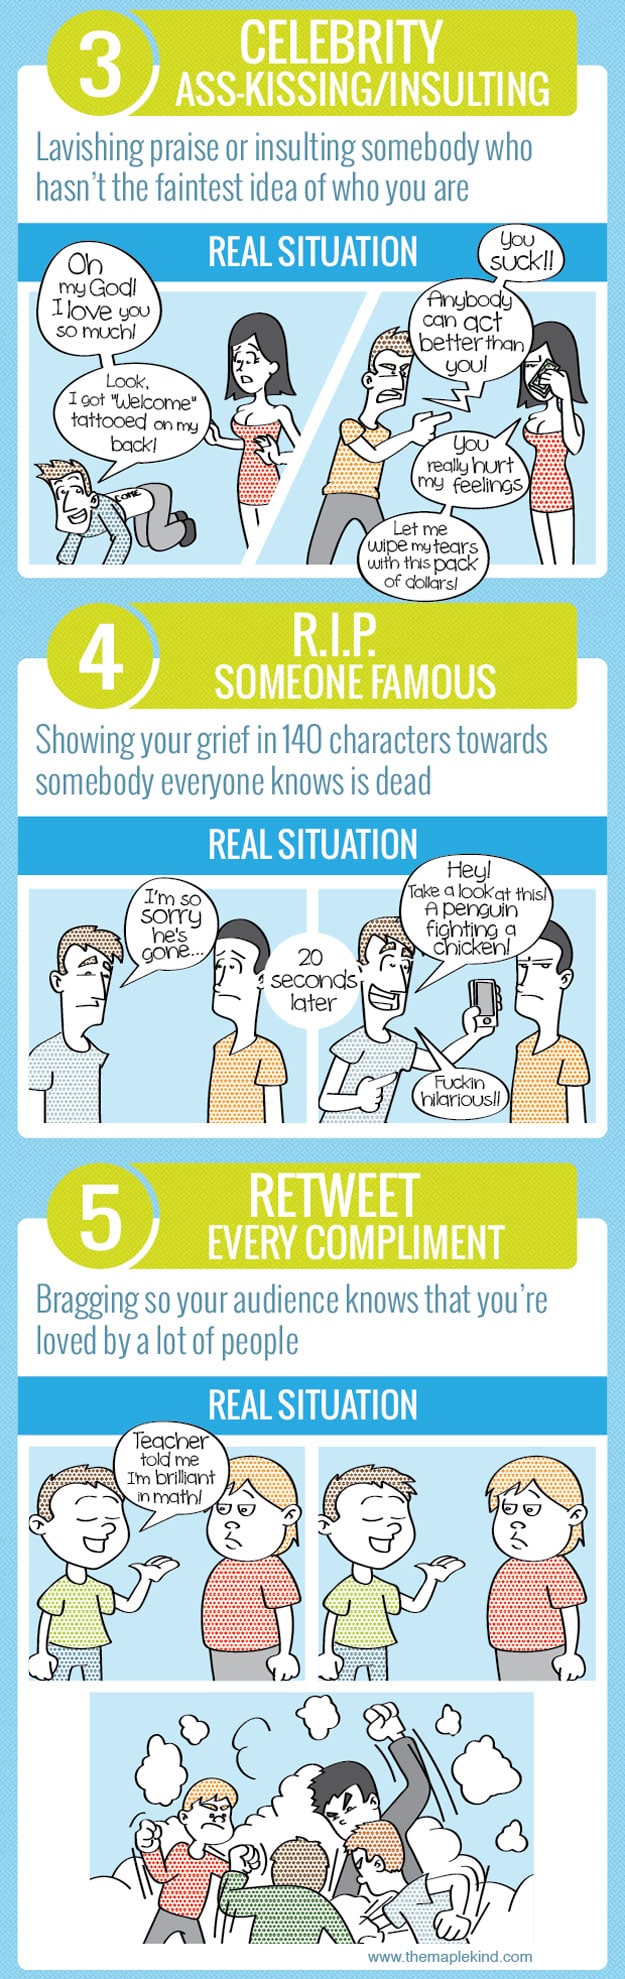 10-twitter-mistakes-irl-infographic